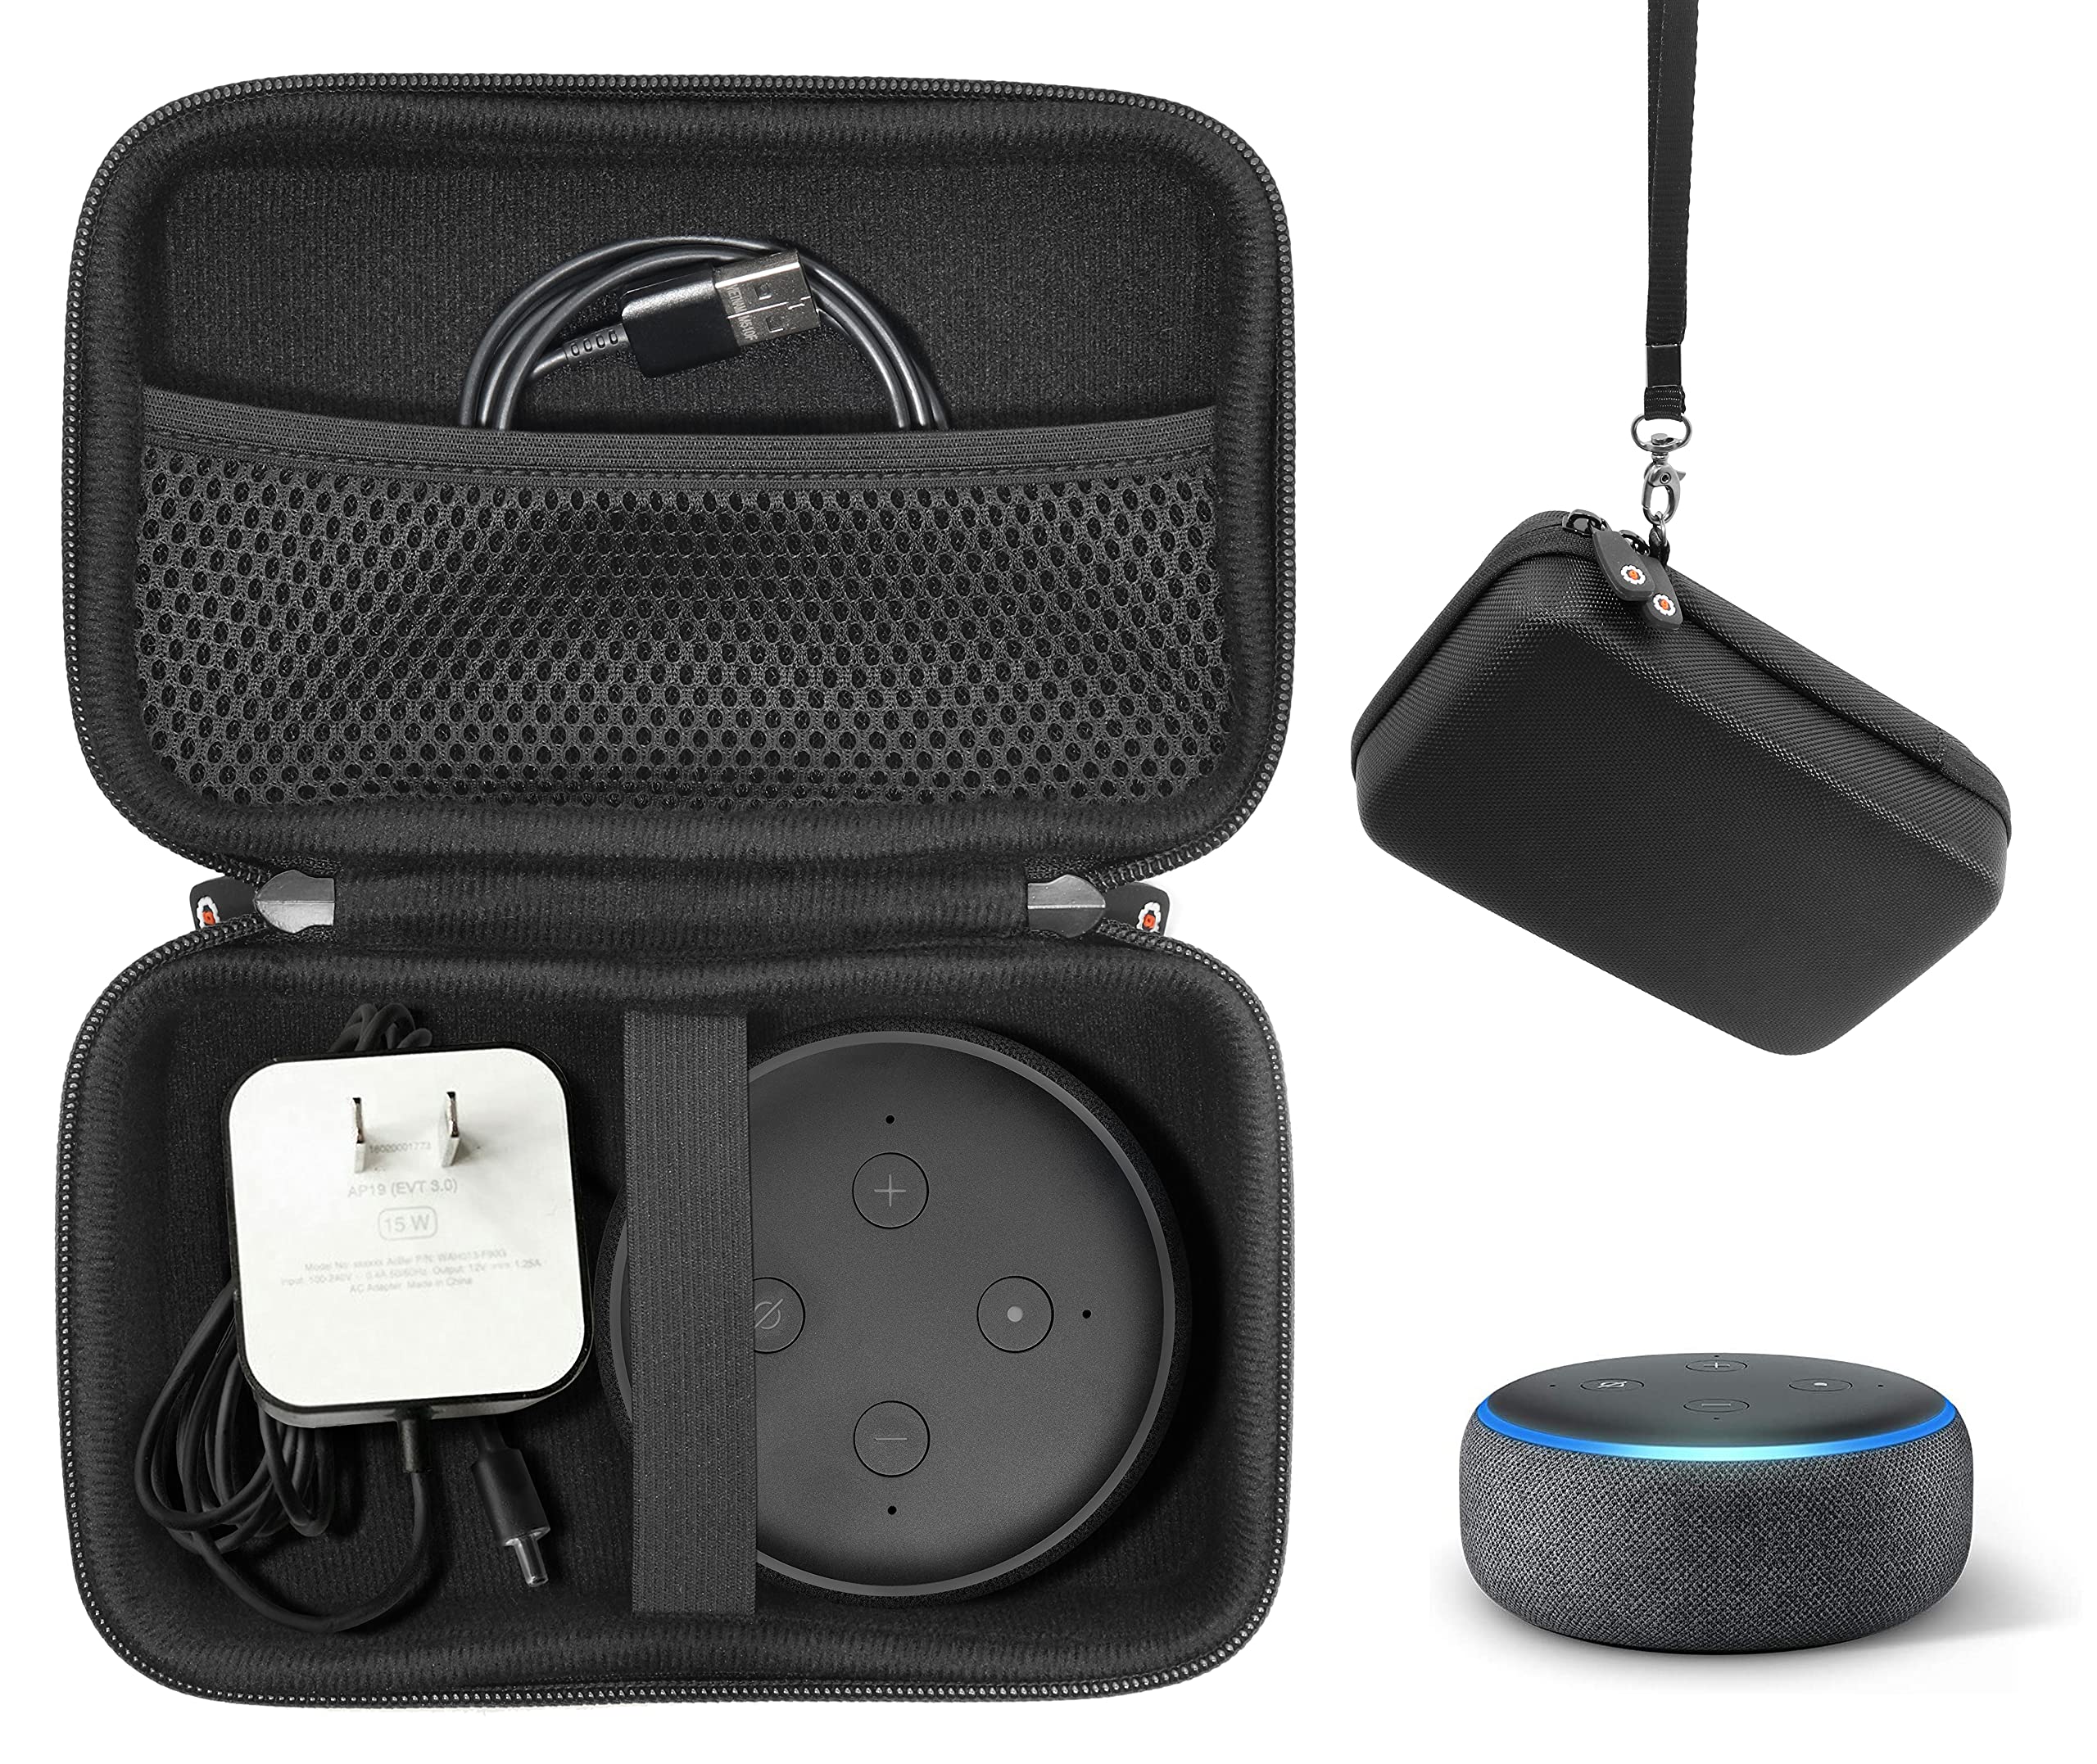 Book Cover WGear Carrying Case for Echo Dot 3rd Generation, all in one carrying and storage solution, strong EVA semi hard case with space for both Echo dot 3 and wall charger, mesh pocket for other accessories Black